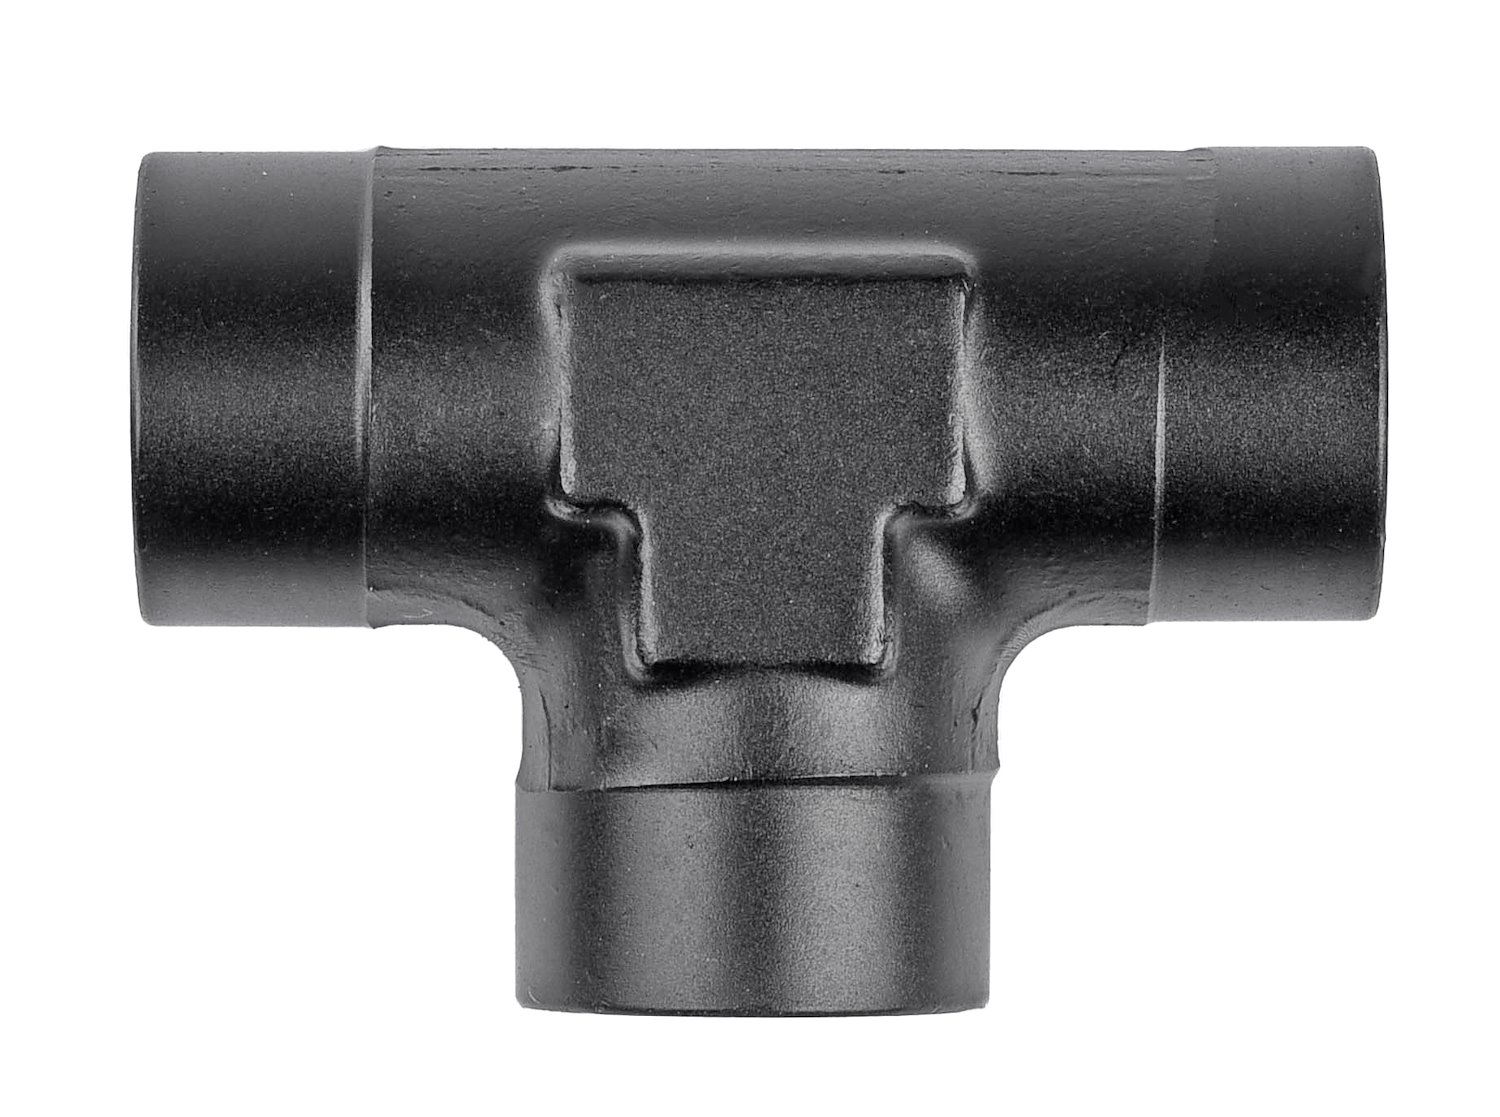 NPT to NPT Tee Adapter Fitting [1/8 in. NPT Female to 1/8 in. NPT Female on Run with 1/8 in. NPT Center Port, Black]